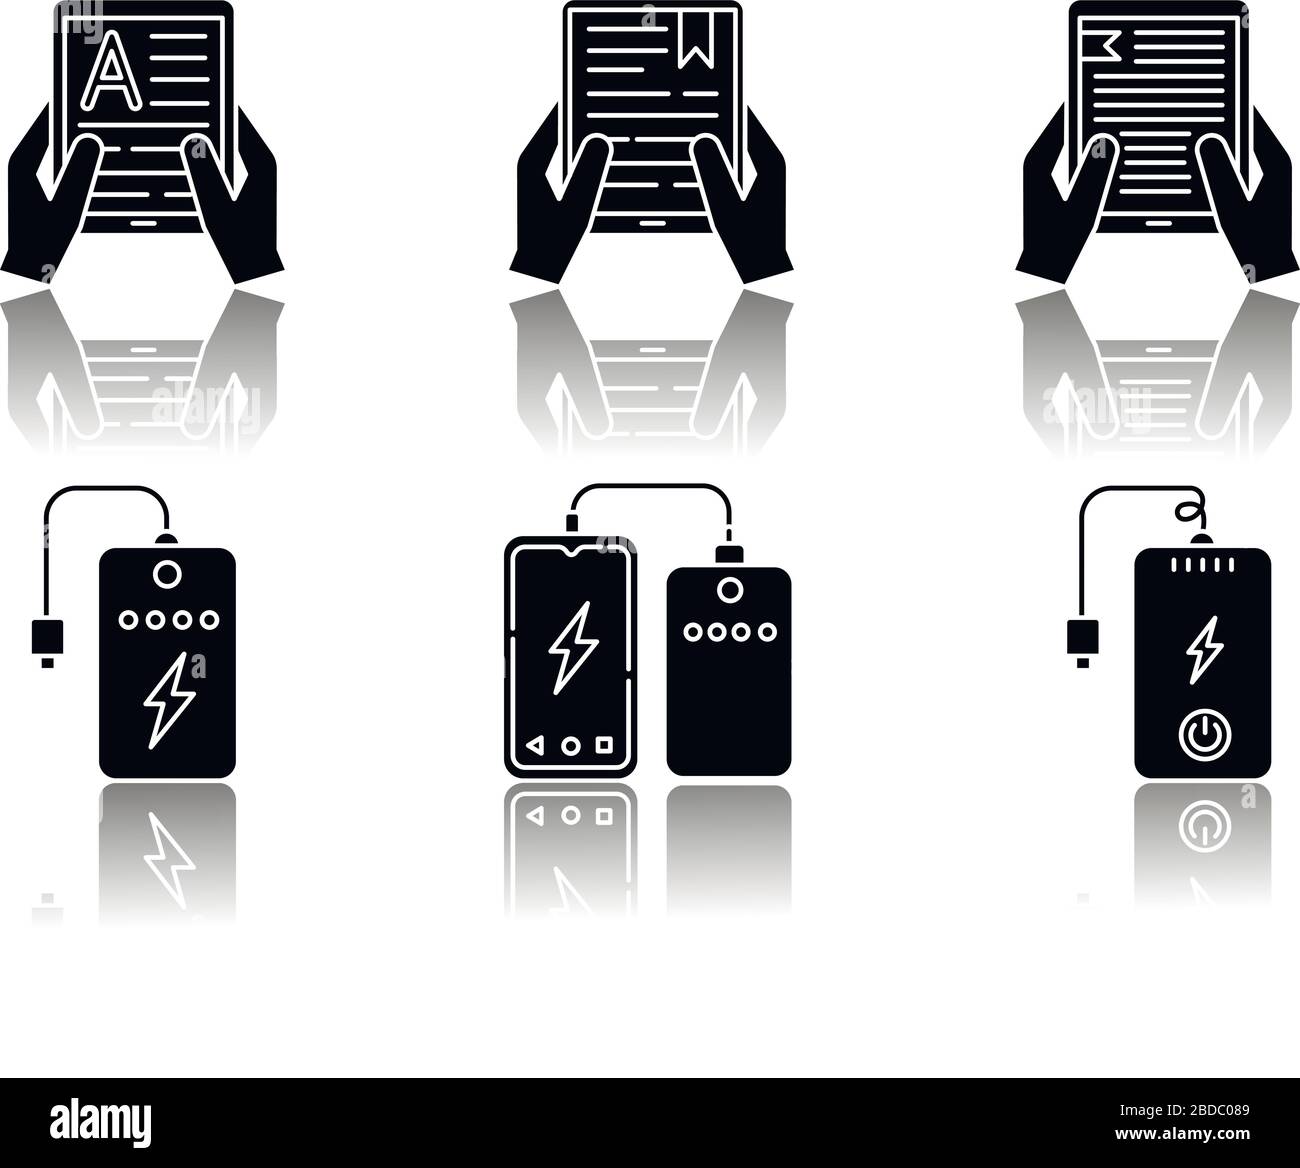 Portable electronic devices drop shadow black glyph icons set. Power bank. Portable battery. Pocket charging gadget. Hands holding e-readers, tablets Stock Vector